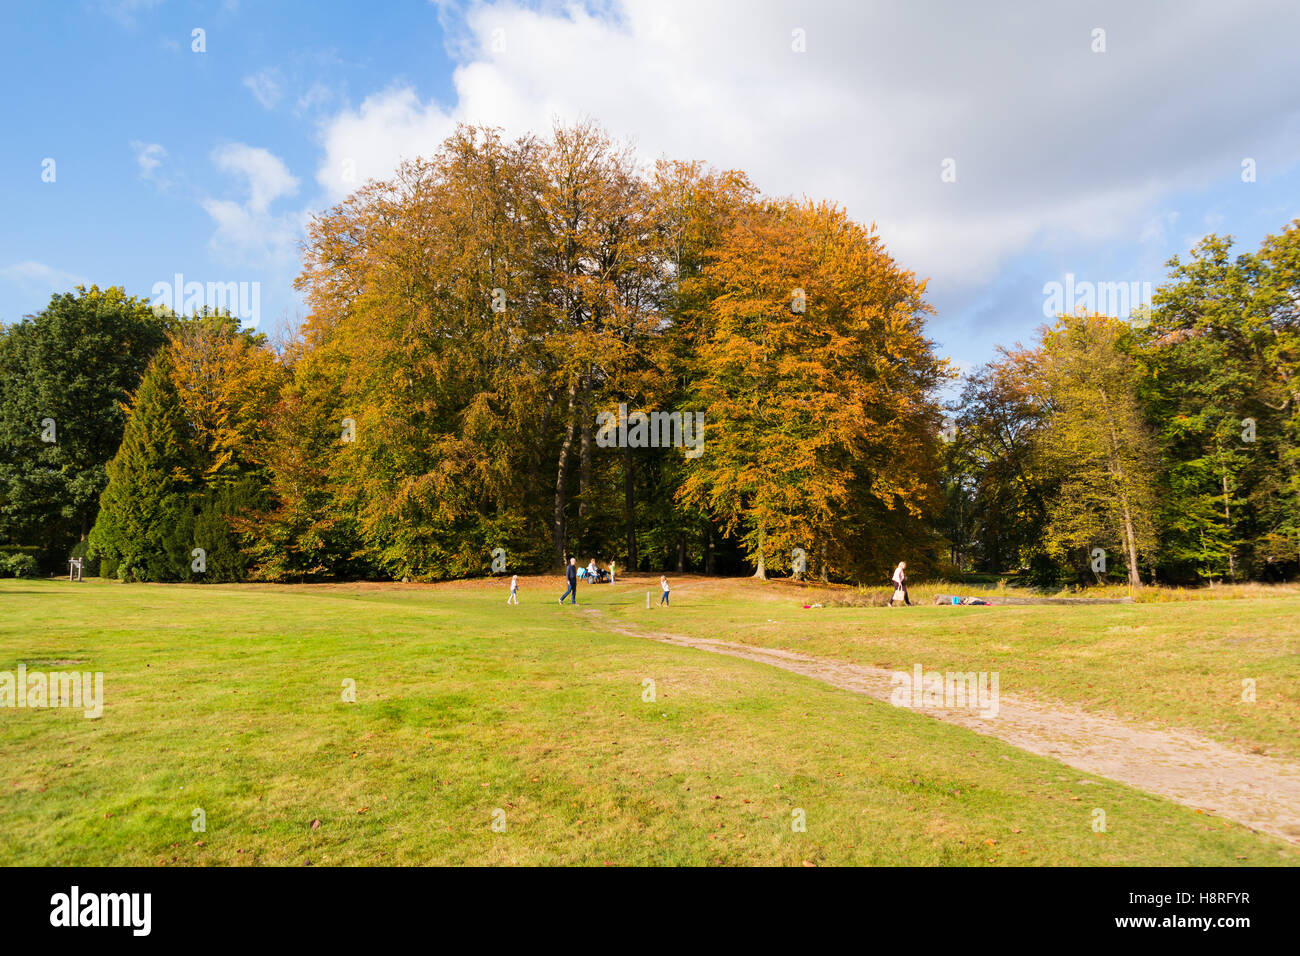 Autumn trees, lawn and people enjoying a sunny day in fall on estate Boekesteyn, 's Graveland, Netherlands Stock Photo